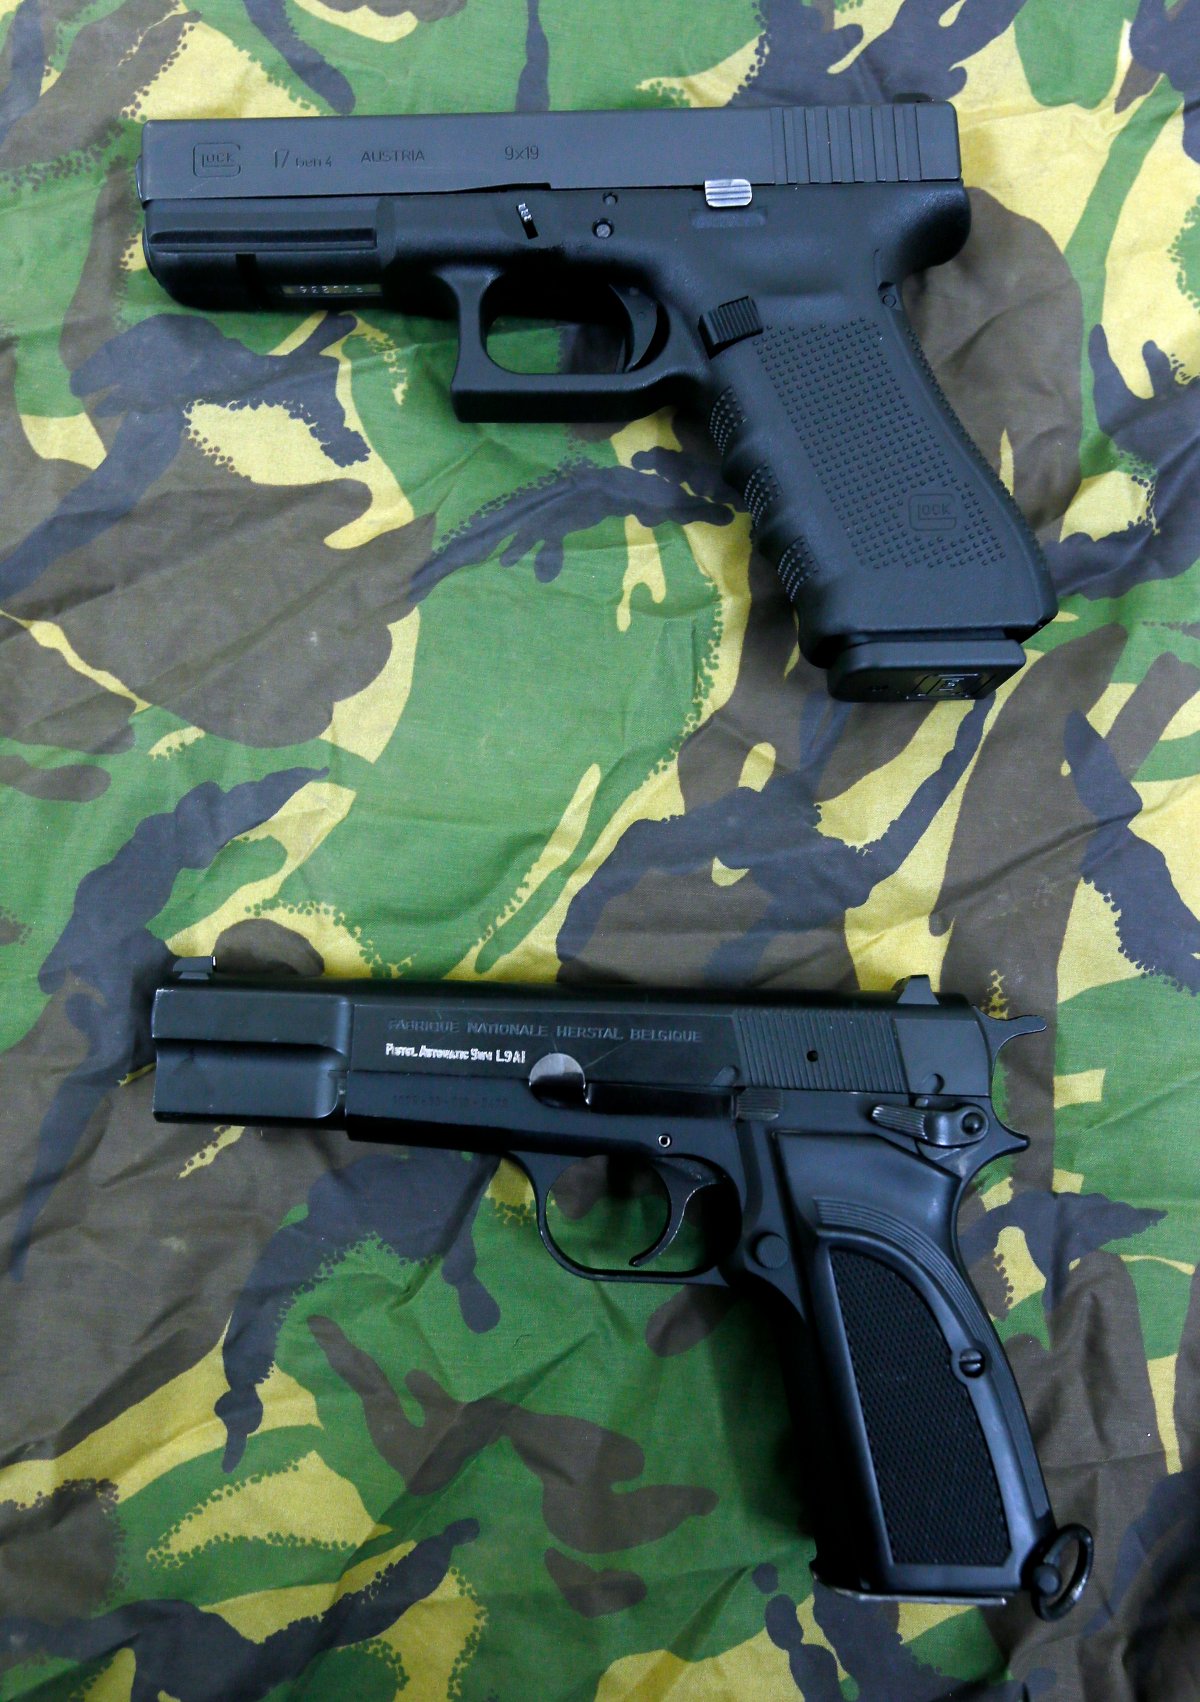 A Glock 17 Gen 4 pistol, top, and a Browning pistol that is being replaced. The British Army needed 25,000 of them, and it got them in two years.

